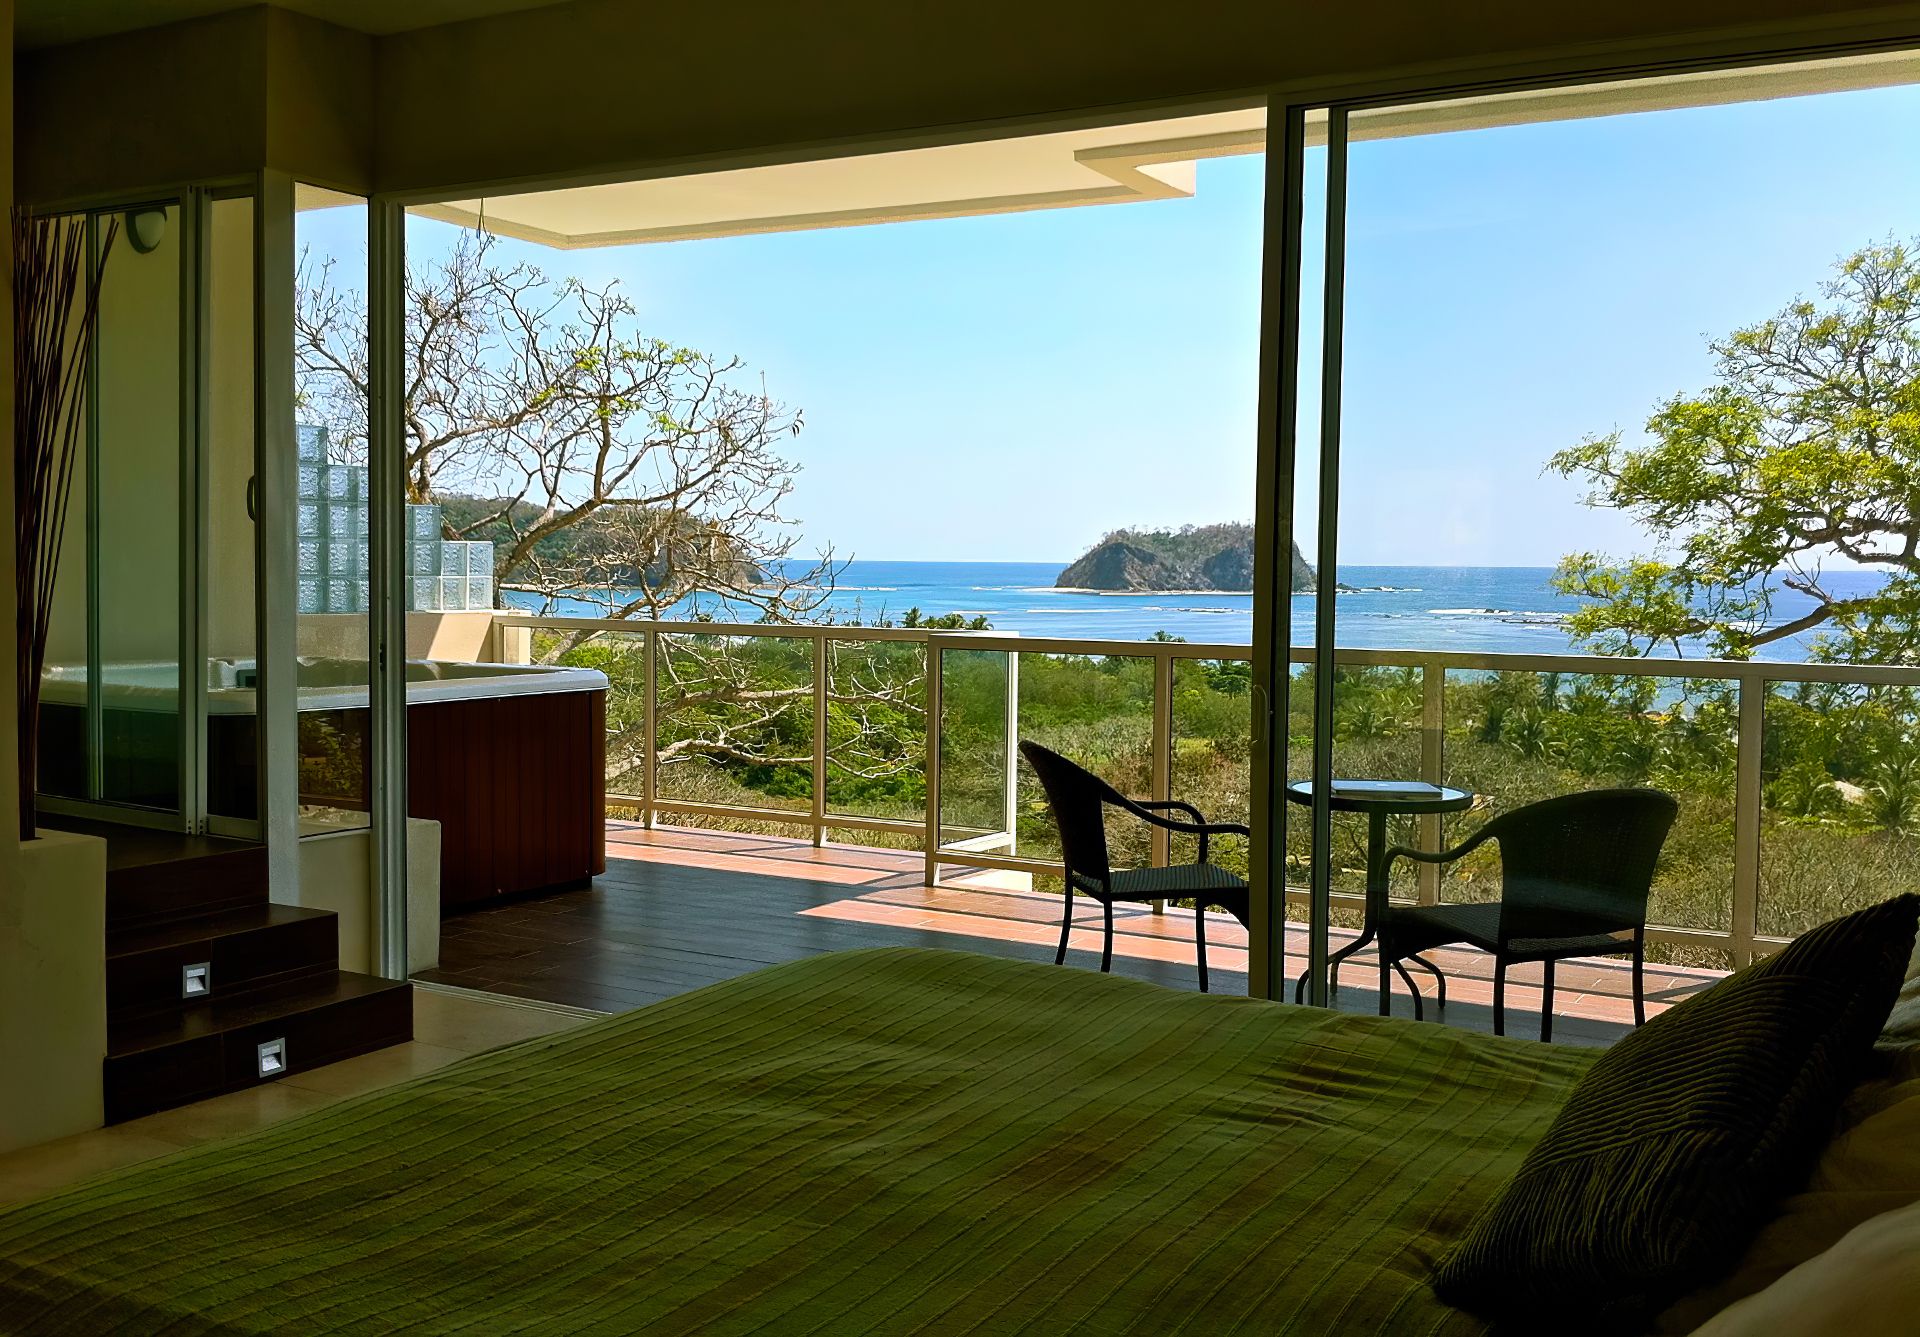 King sized bed with green bedspread with balcony jacuzzi and 2 chairs and table looking the ocean Samara Reef Condo for sale Samara Guanacaste Costa Rica